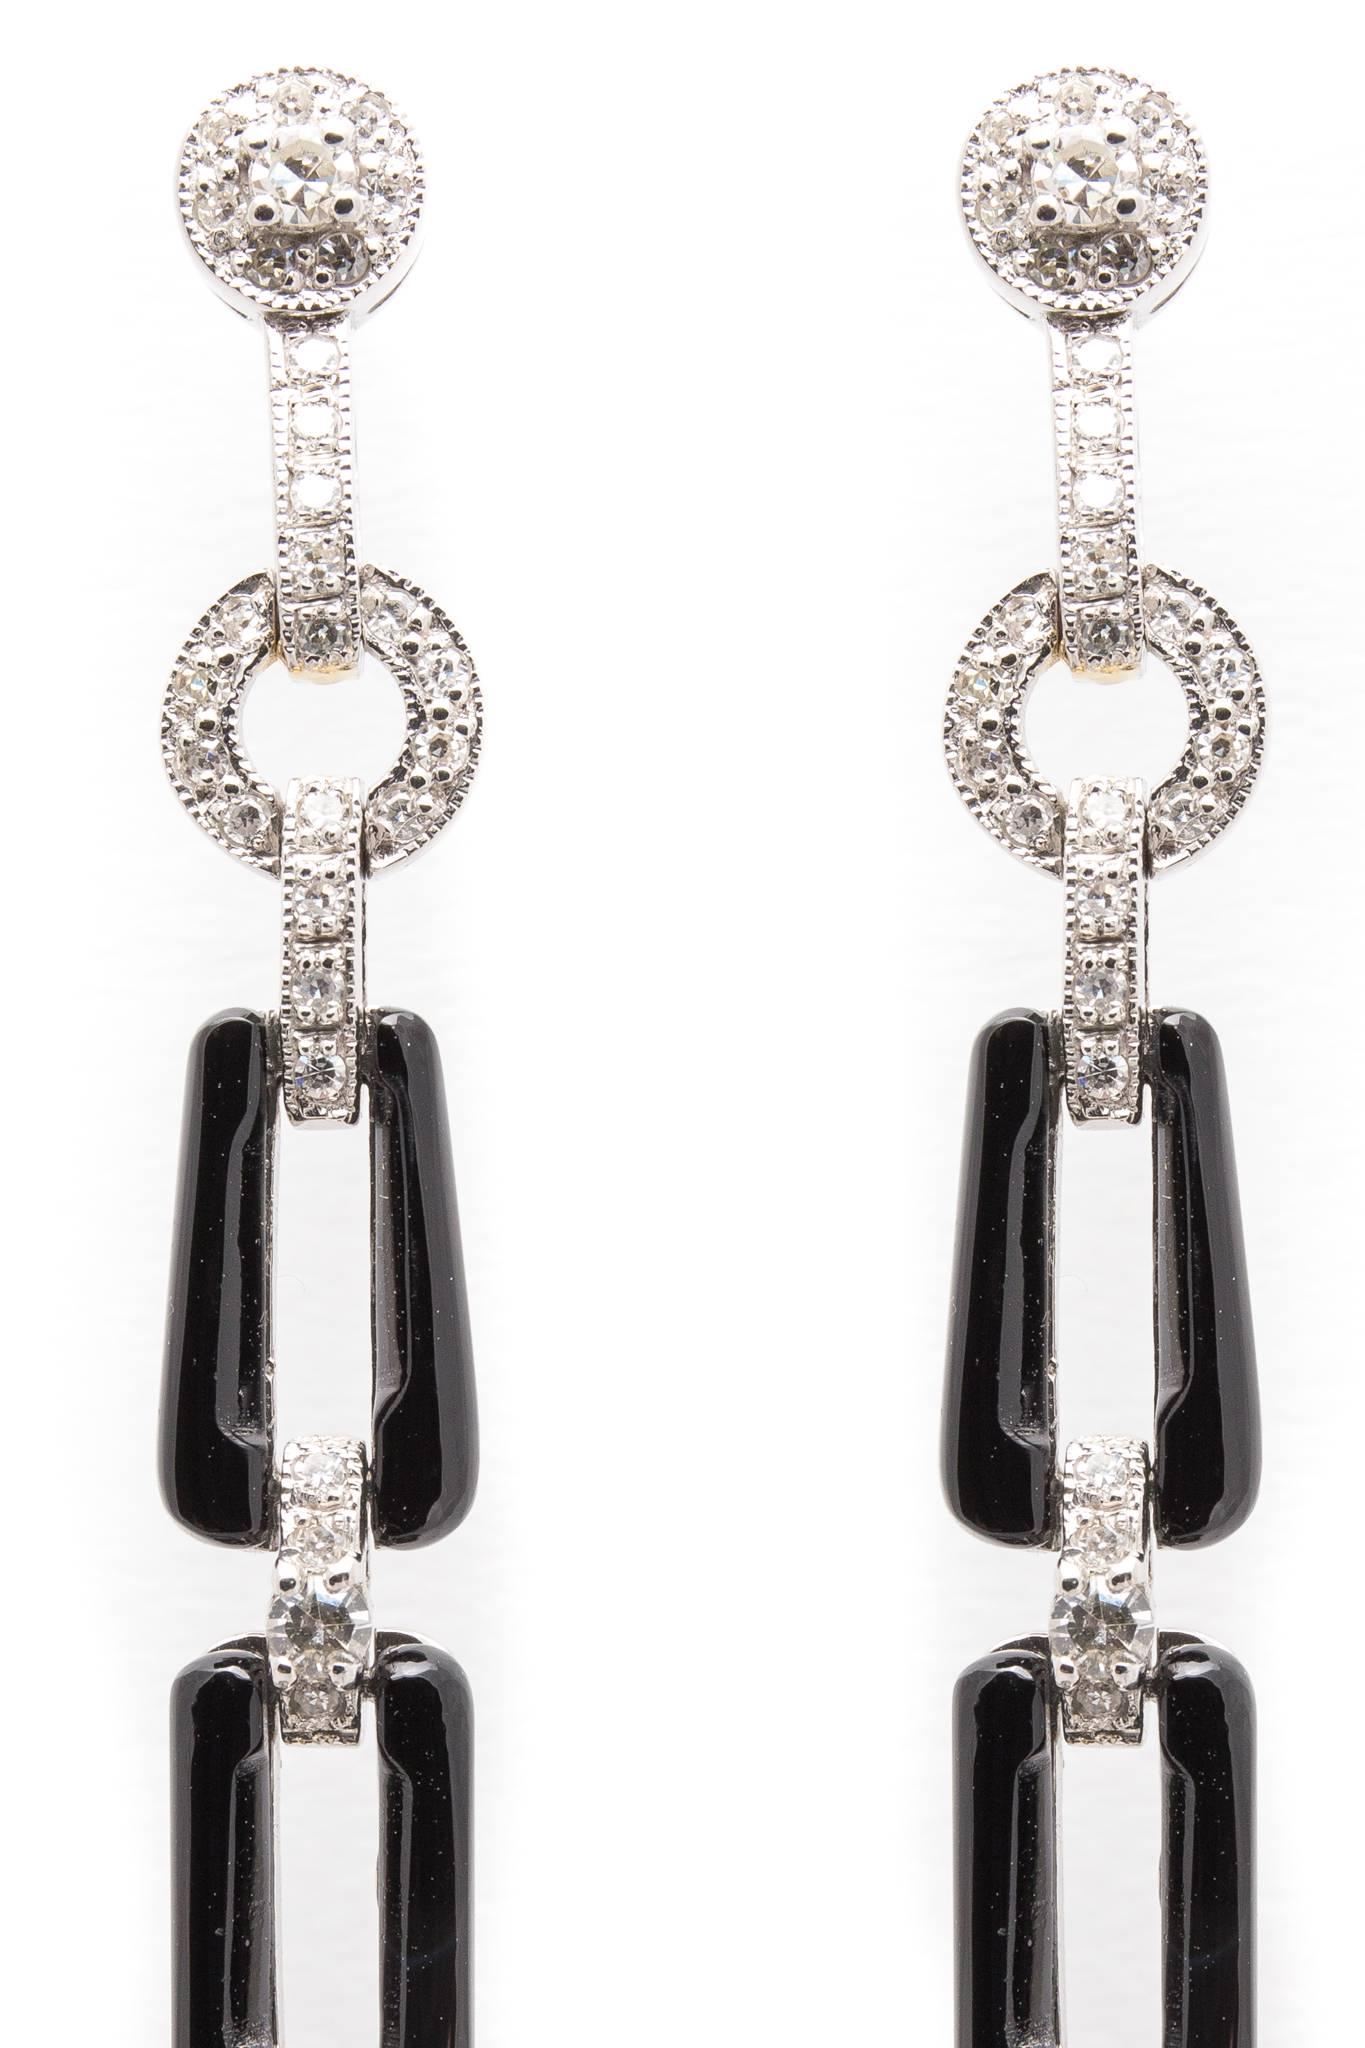 Beacon Hill Jewelers Presents:

A pair of dramatic diamond and onyx earrings in luxurious platinum. Beautifully handcrafted these dangling earrings feature sparkling pave set antique Swiss cut diamonds along with cabochon cut onyx in luxurious